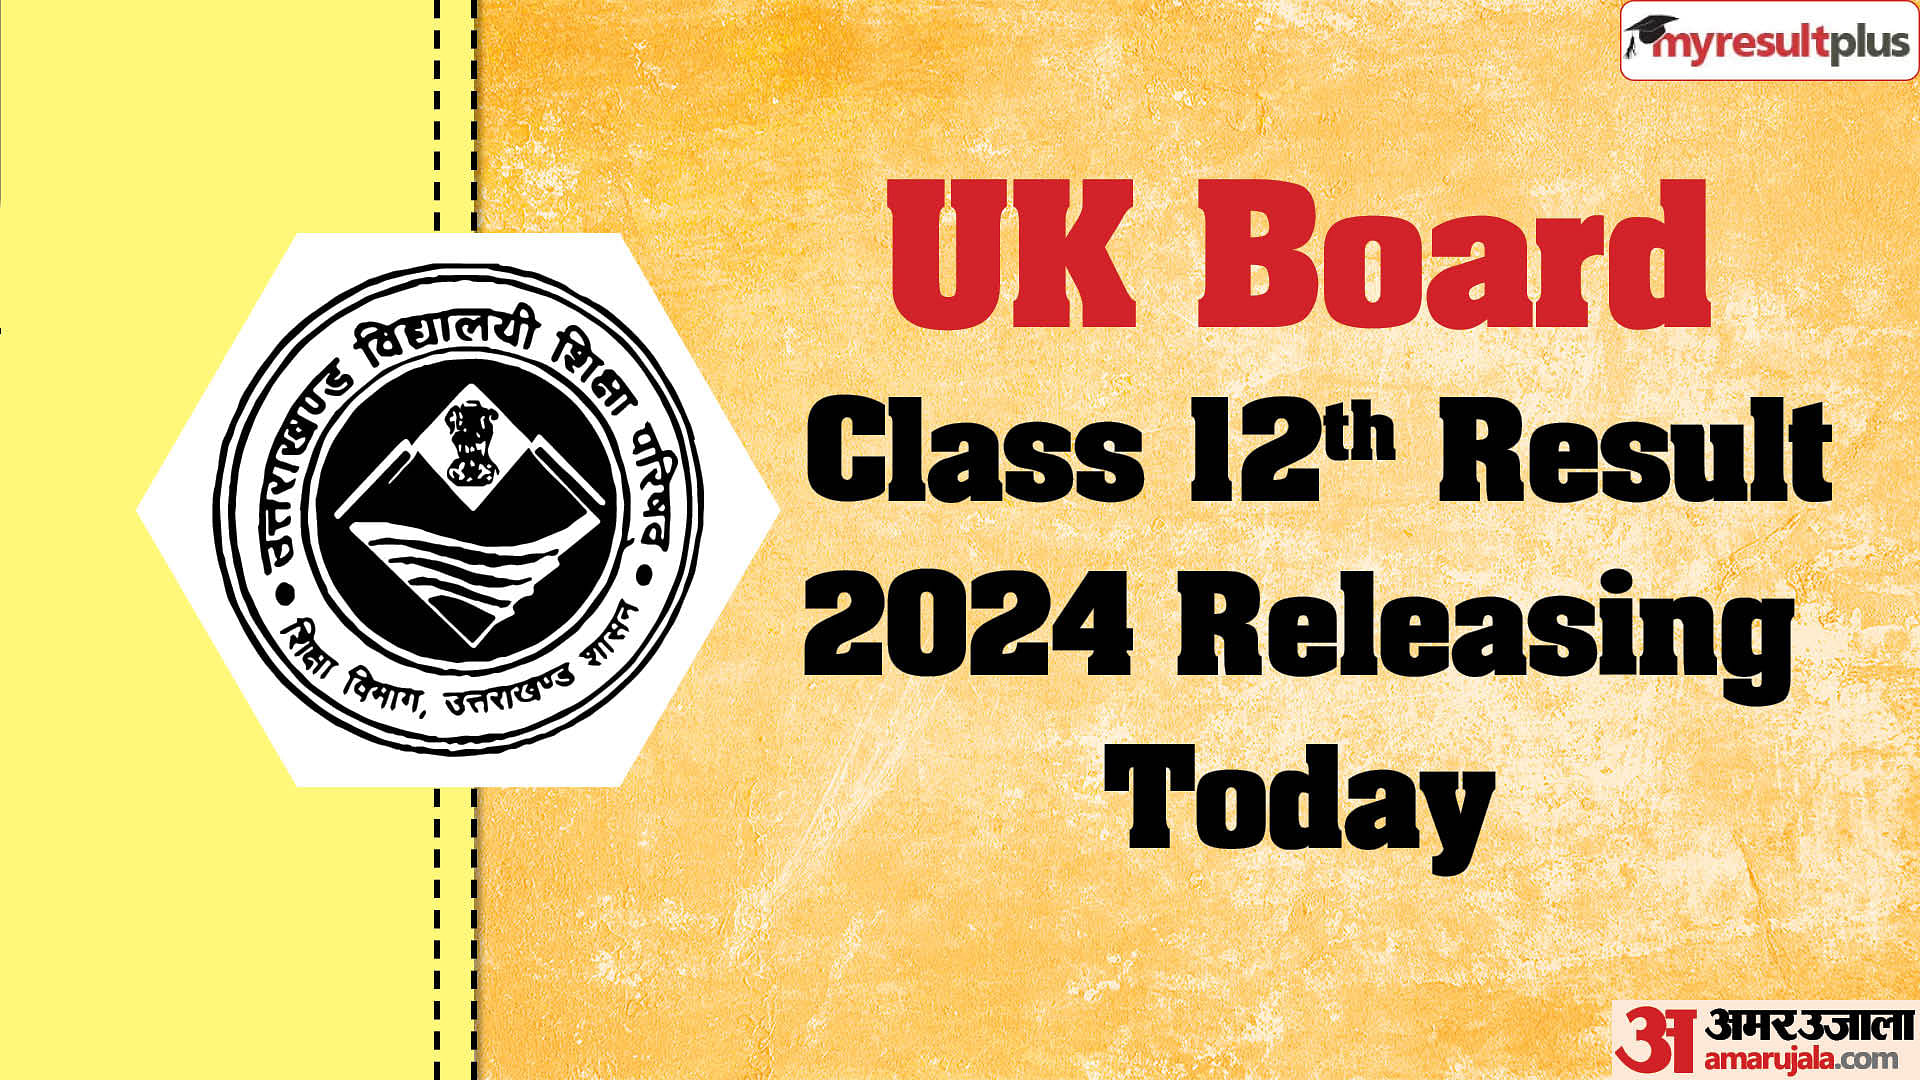 UK Board Class 12th Result 2024 to be declared today, Read more details here